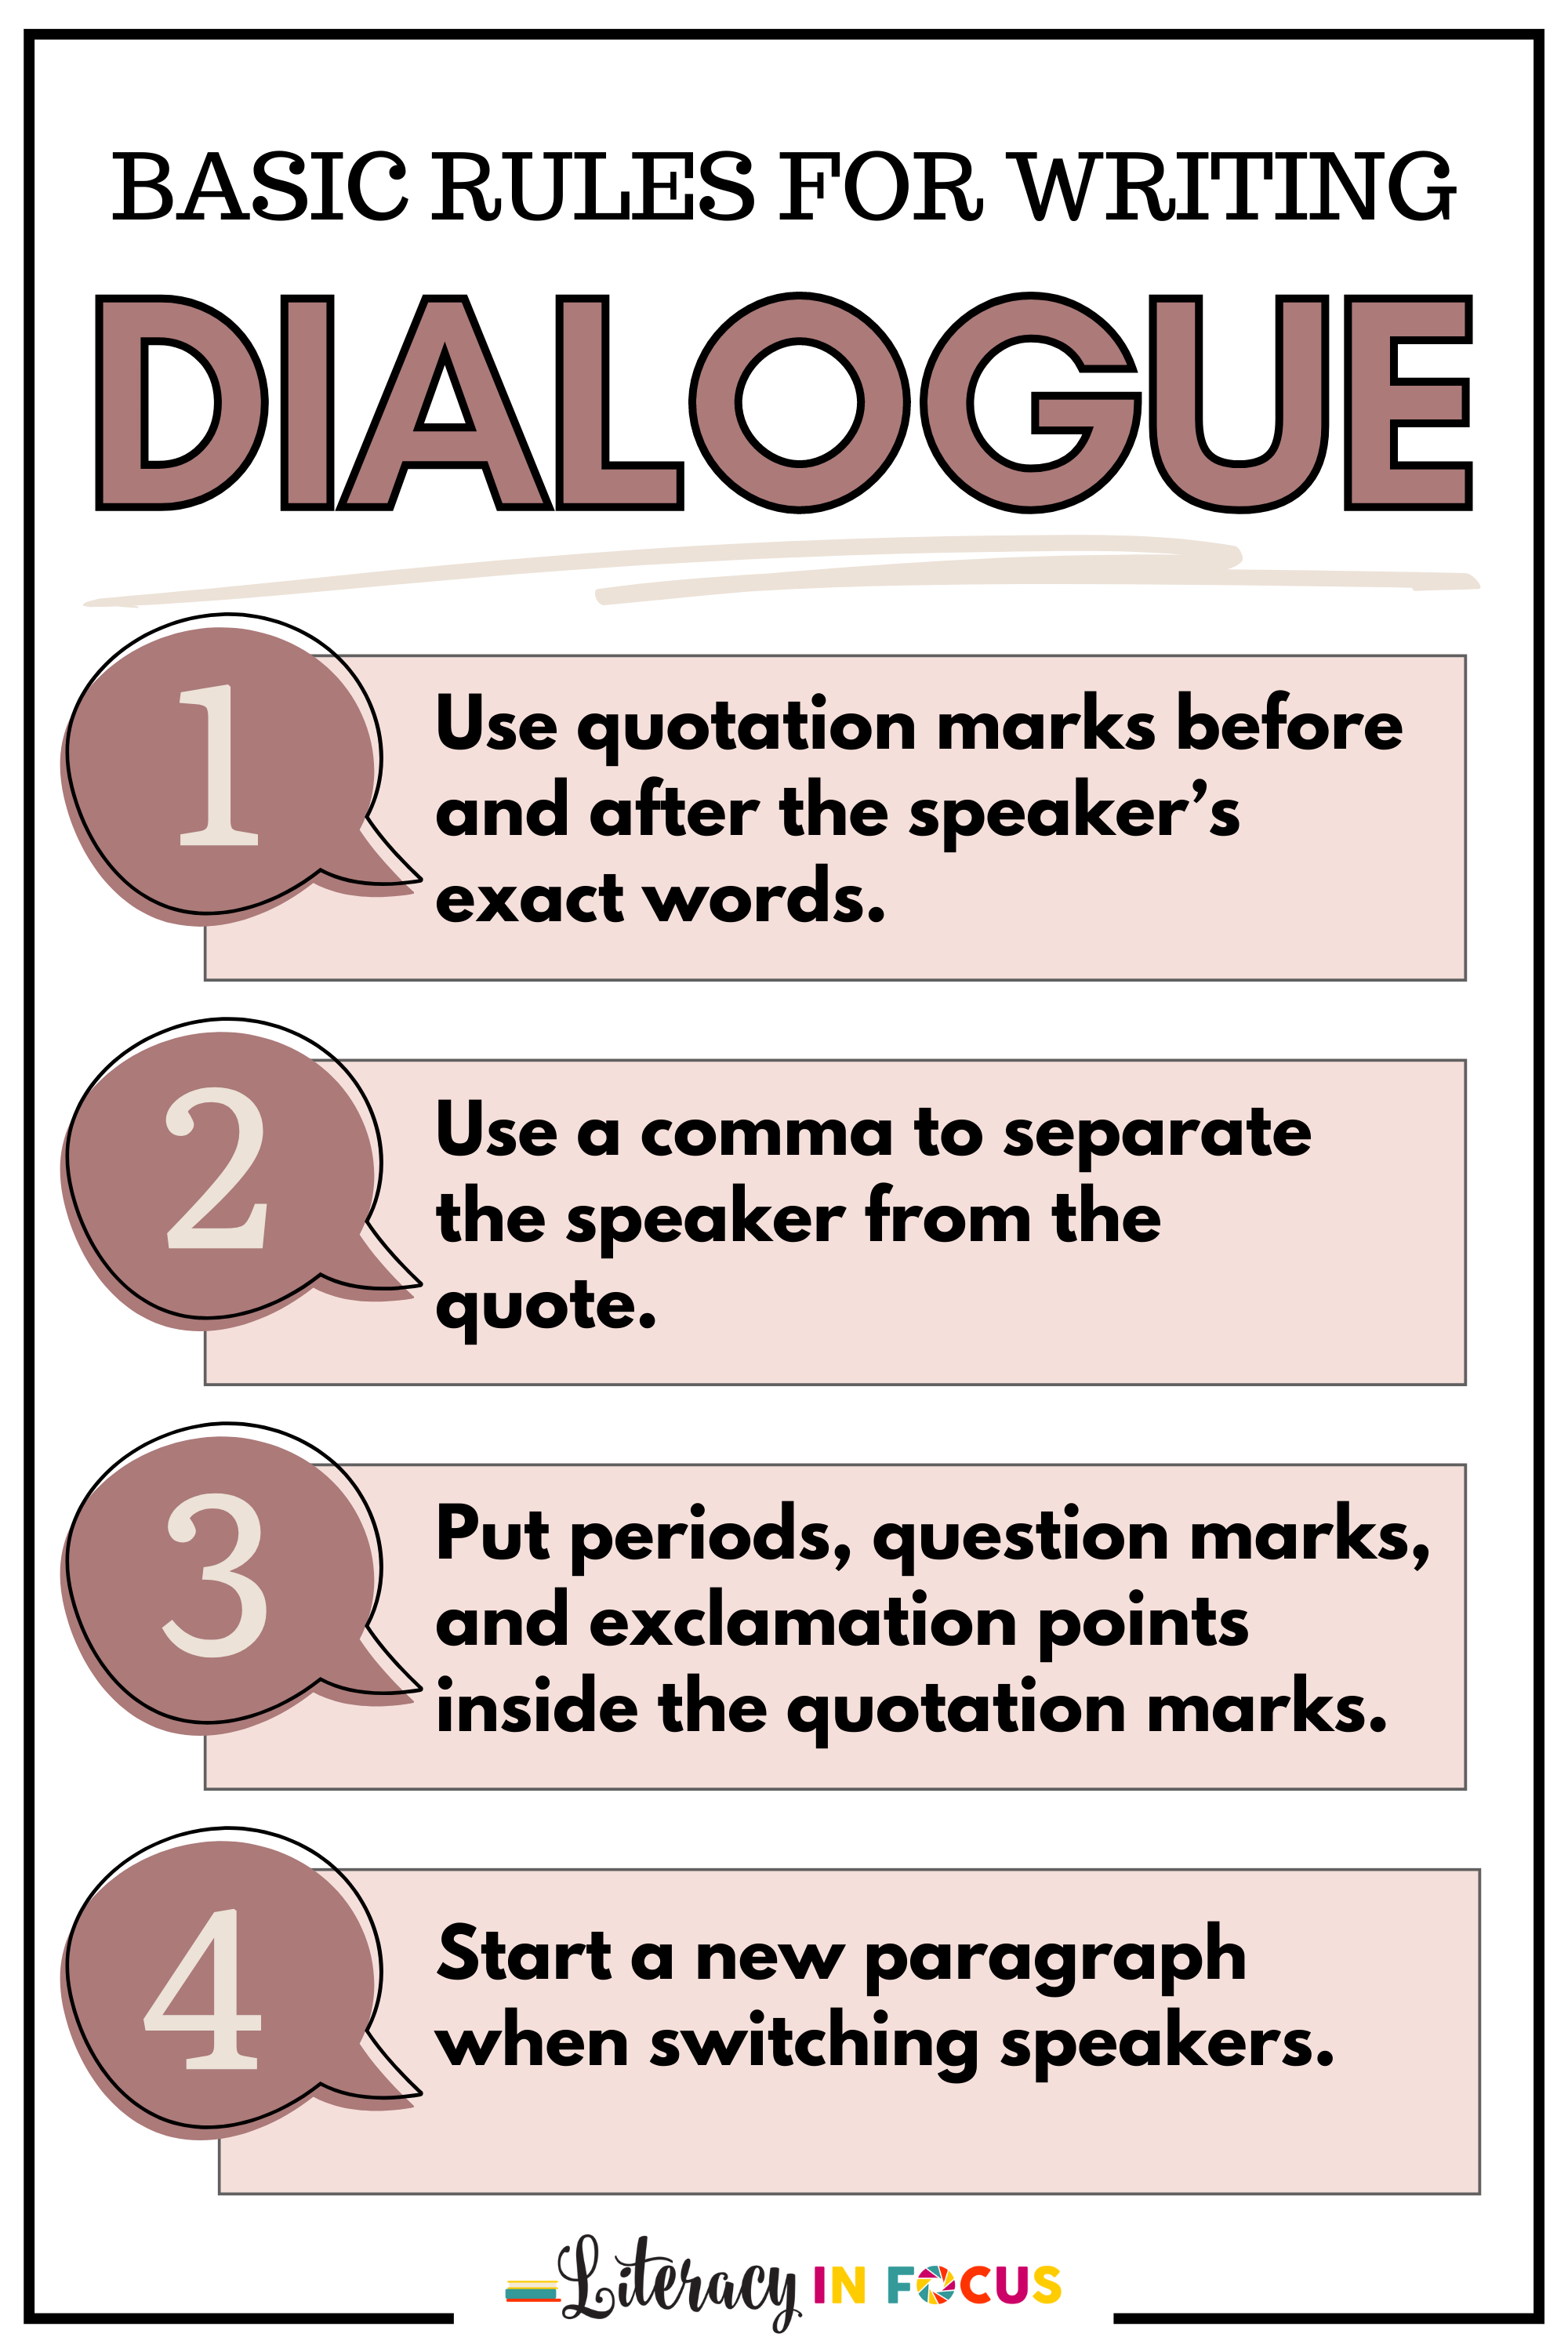 Basic Dialogue Writing | Rules and Tips for Students